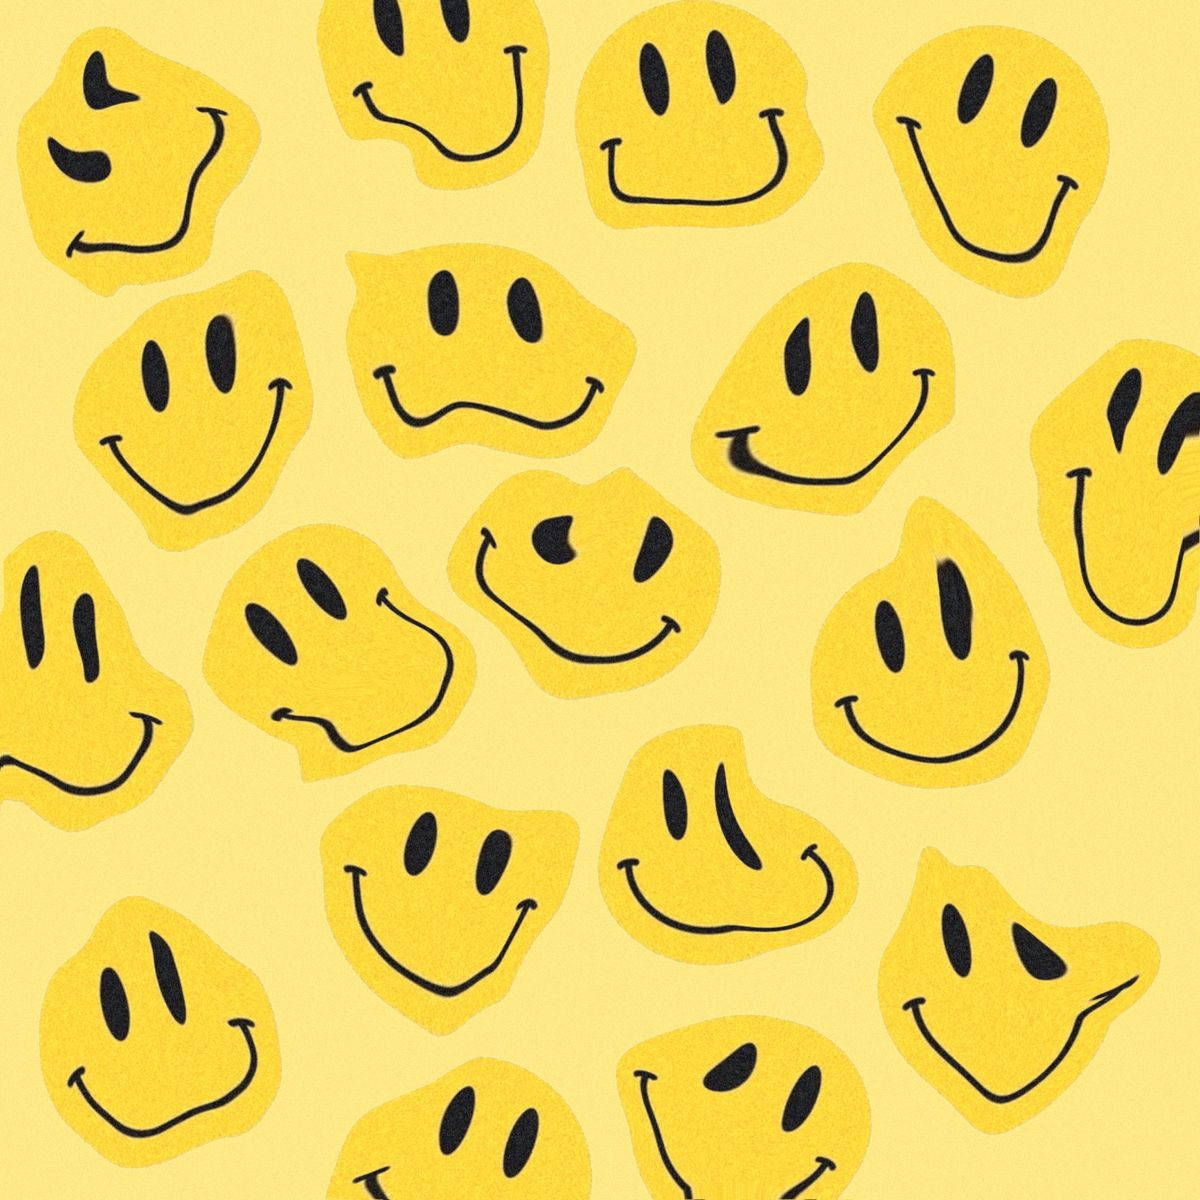 Funny Distorted Smiley Faces